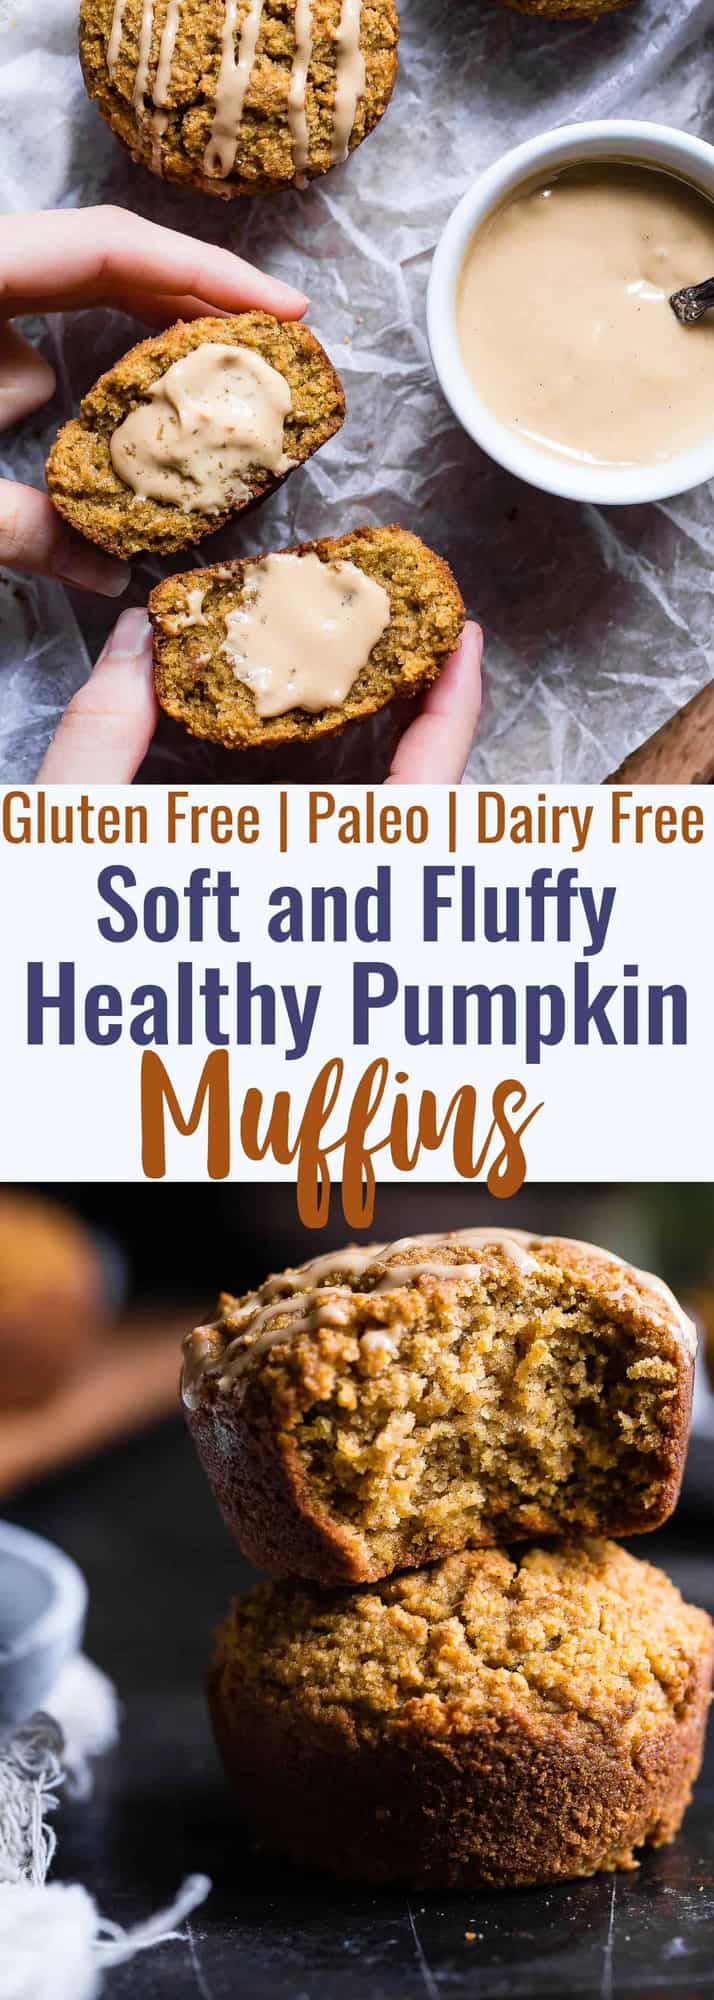 Paleo pumpkin muffins - These quick and easy, healthy almond flour pumpkin muffins are SO spicy-sweet and FLUFFY! A yummy, fall breakfast or snack that kids or adults will LOVE! | #Foodfaithfitness | #Glutenfree #Paleo #Healthy #Pumpkin #Muffins